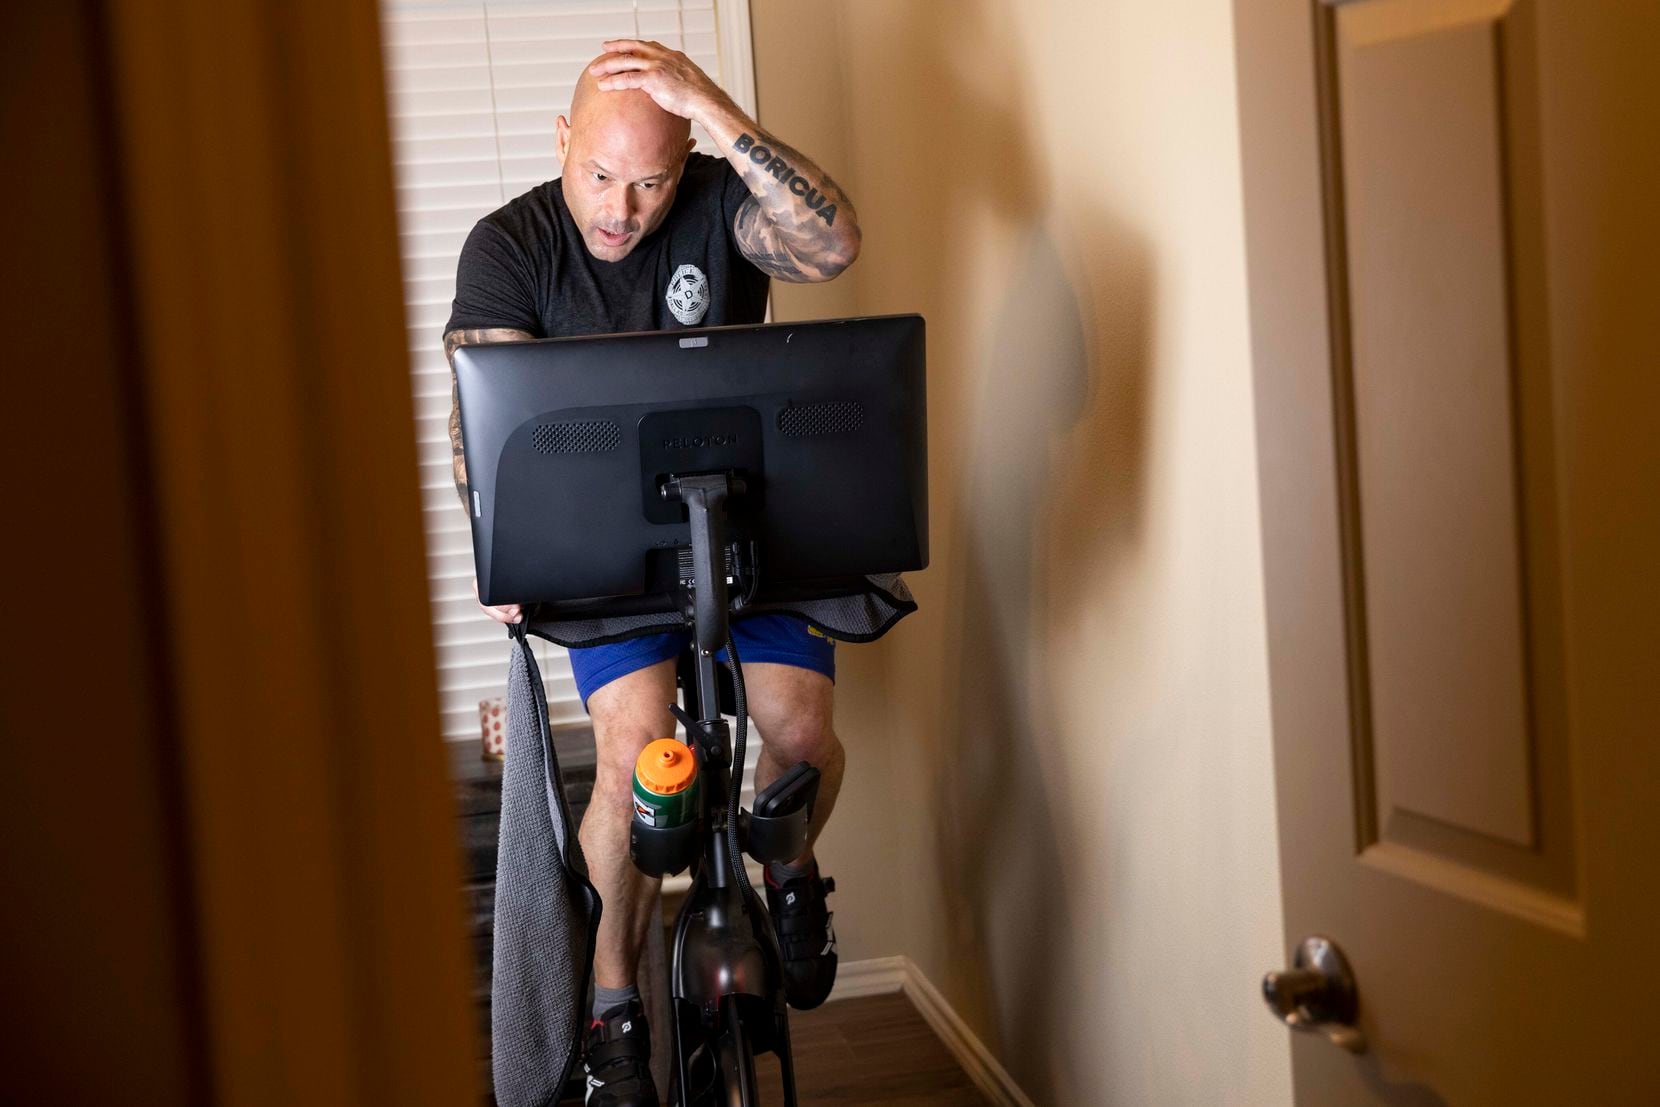 Dallas police Chief Eddie García finishes up his daily workout by doing cardio on his Peleton exercise bike at his home on Thursday, Jan. 27, 2022, in Dallas, TX. 